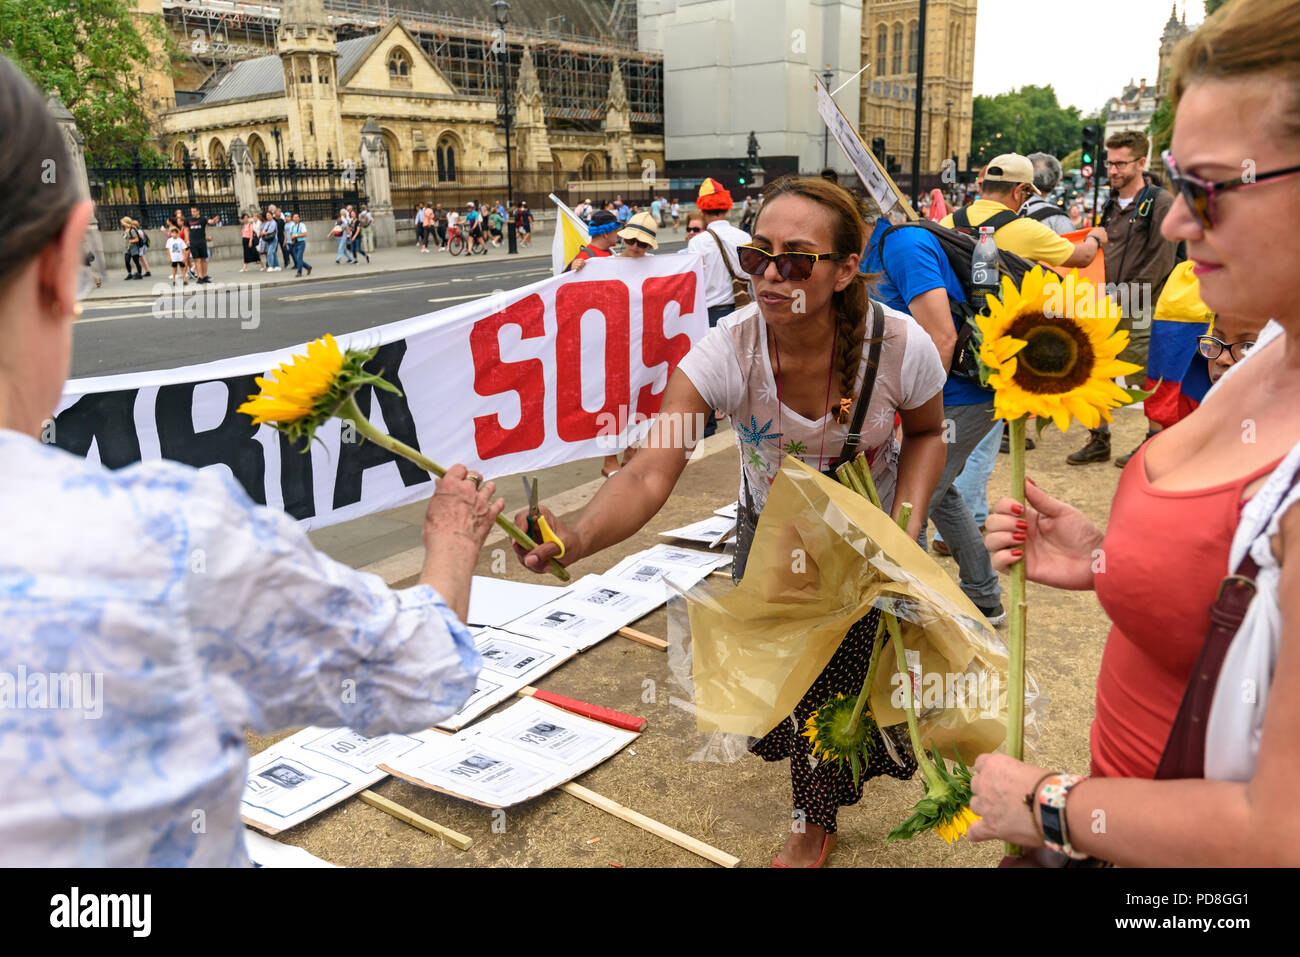 London, UK. 7th August 2018. A Colombian woman hands out sunflowers to others at a  protest in Parliament Square in support of the peace process in Colombia and demanding an end to the daily threats and murders throughout the country. ook place today at the UN in New York, the International Court of Justice in The Hague, and in Washing Credit: Peter Marshall/Alamy Live News Stock Photo